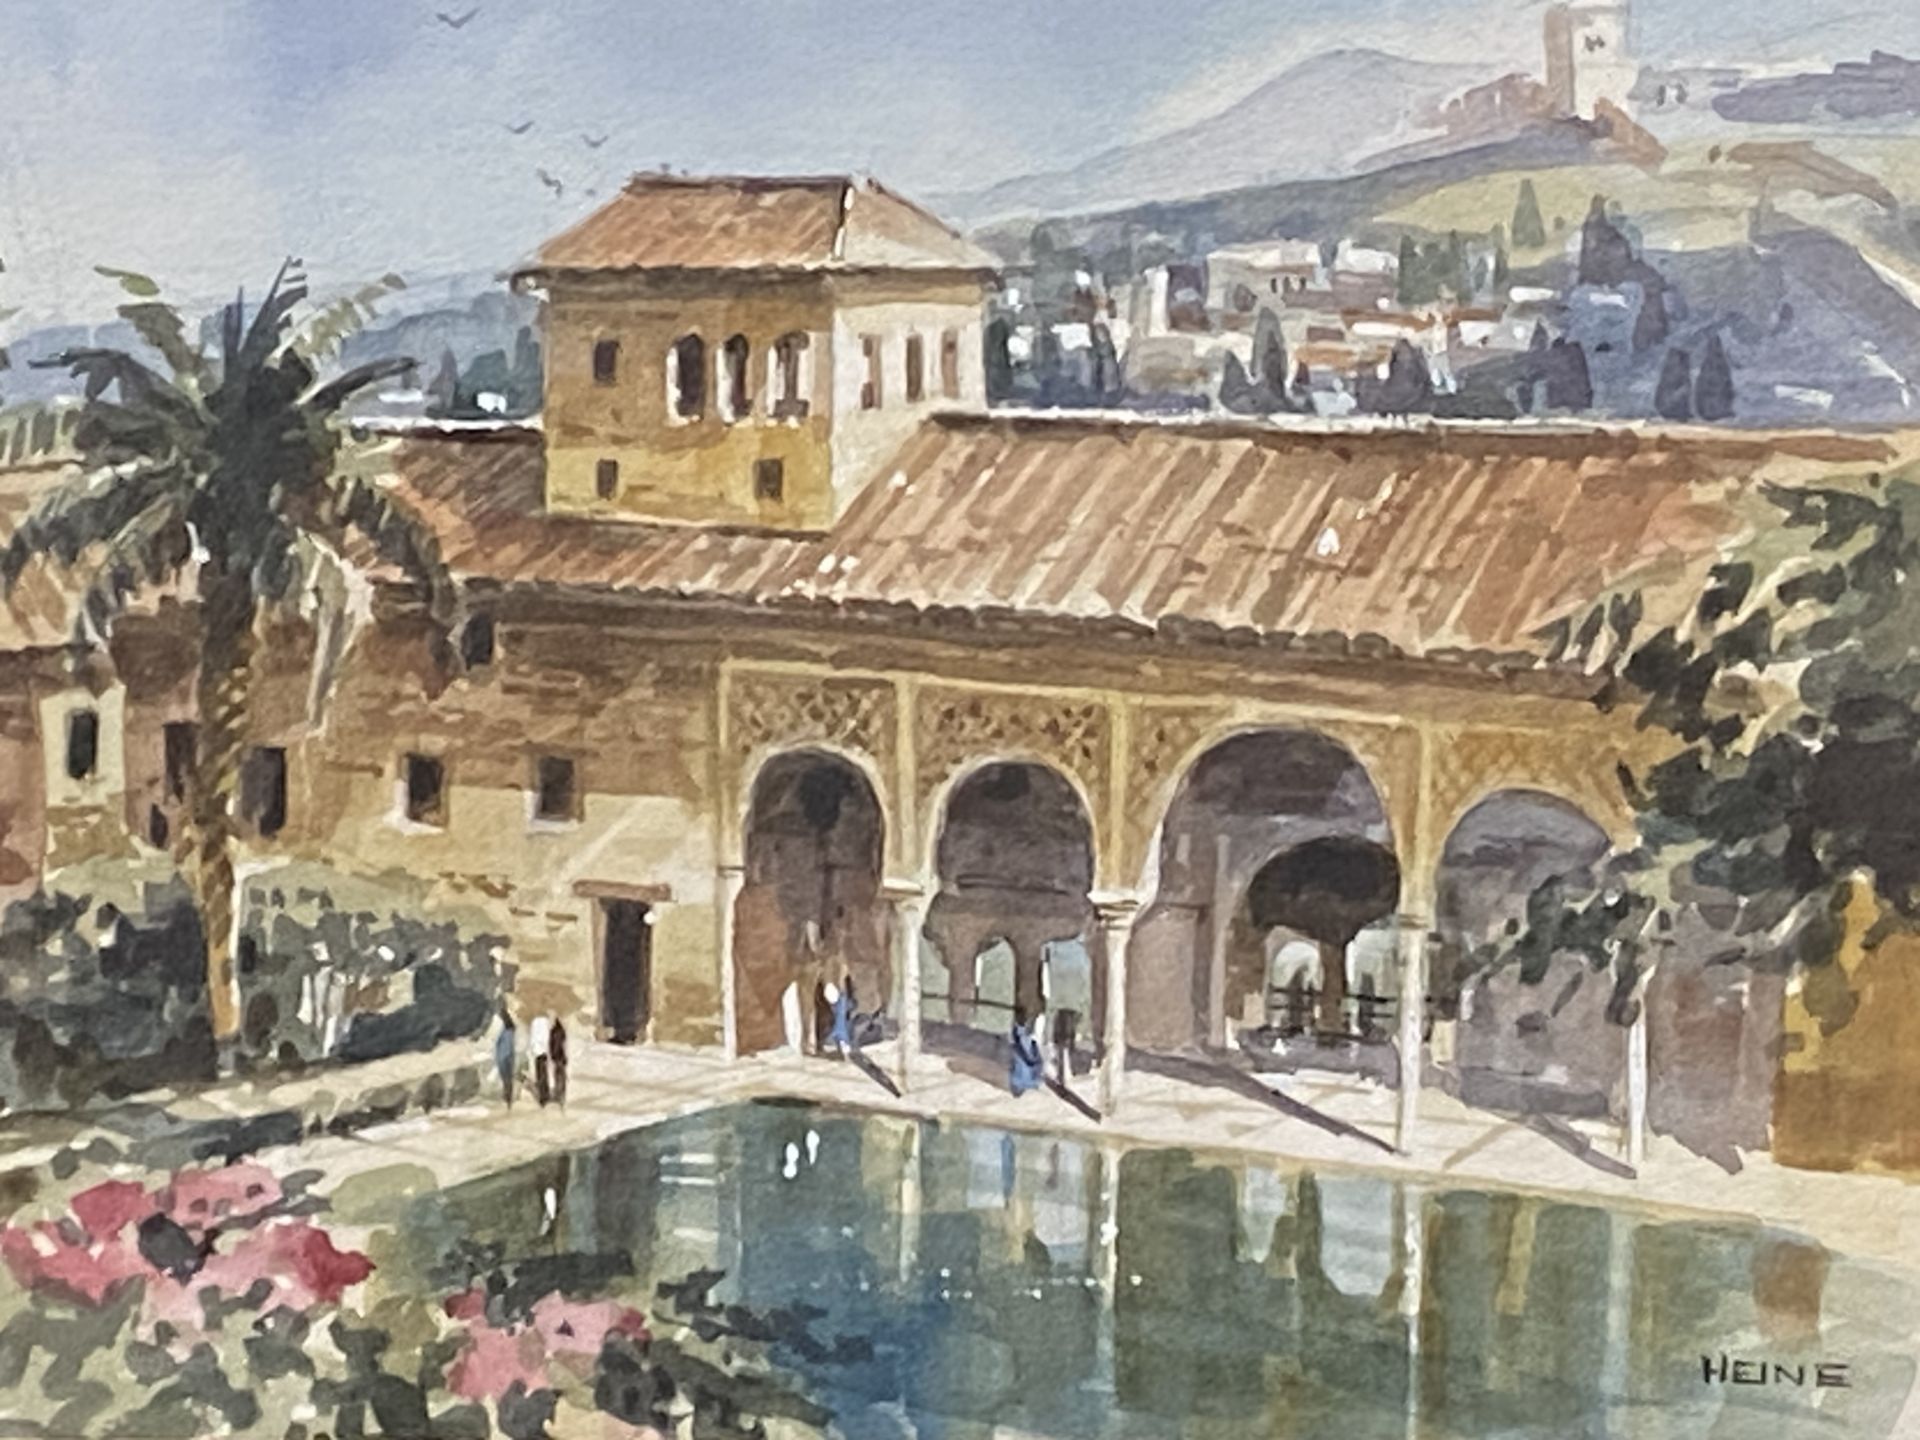 Framed and glazed watercolour of the Lady's Tower in Alhambra